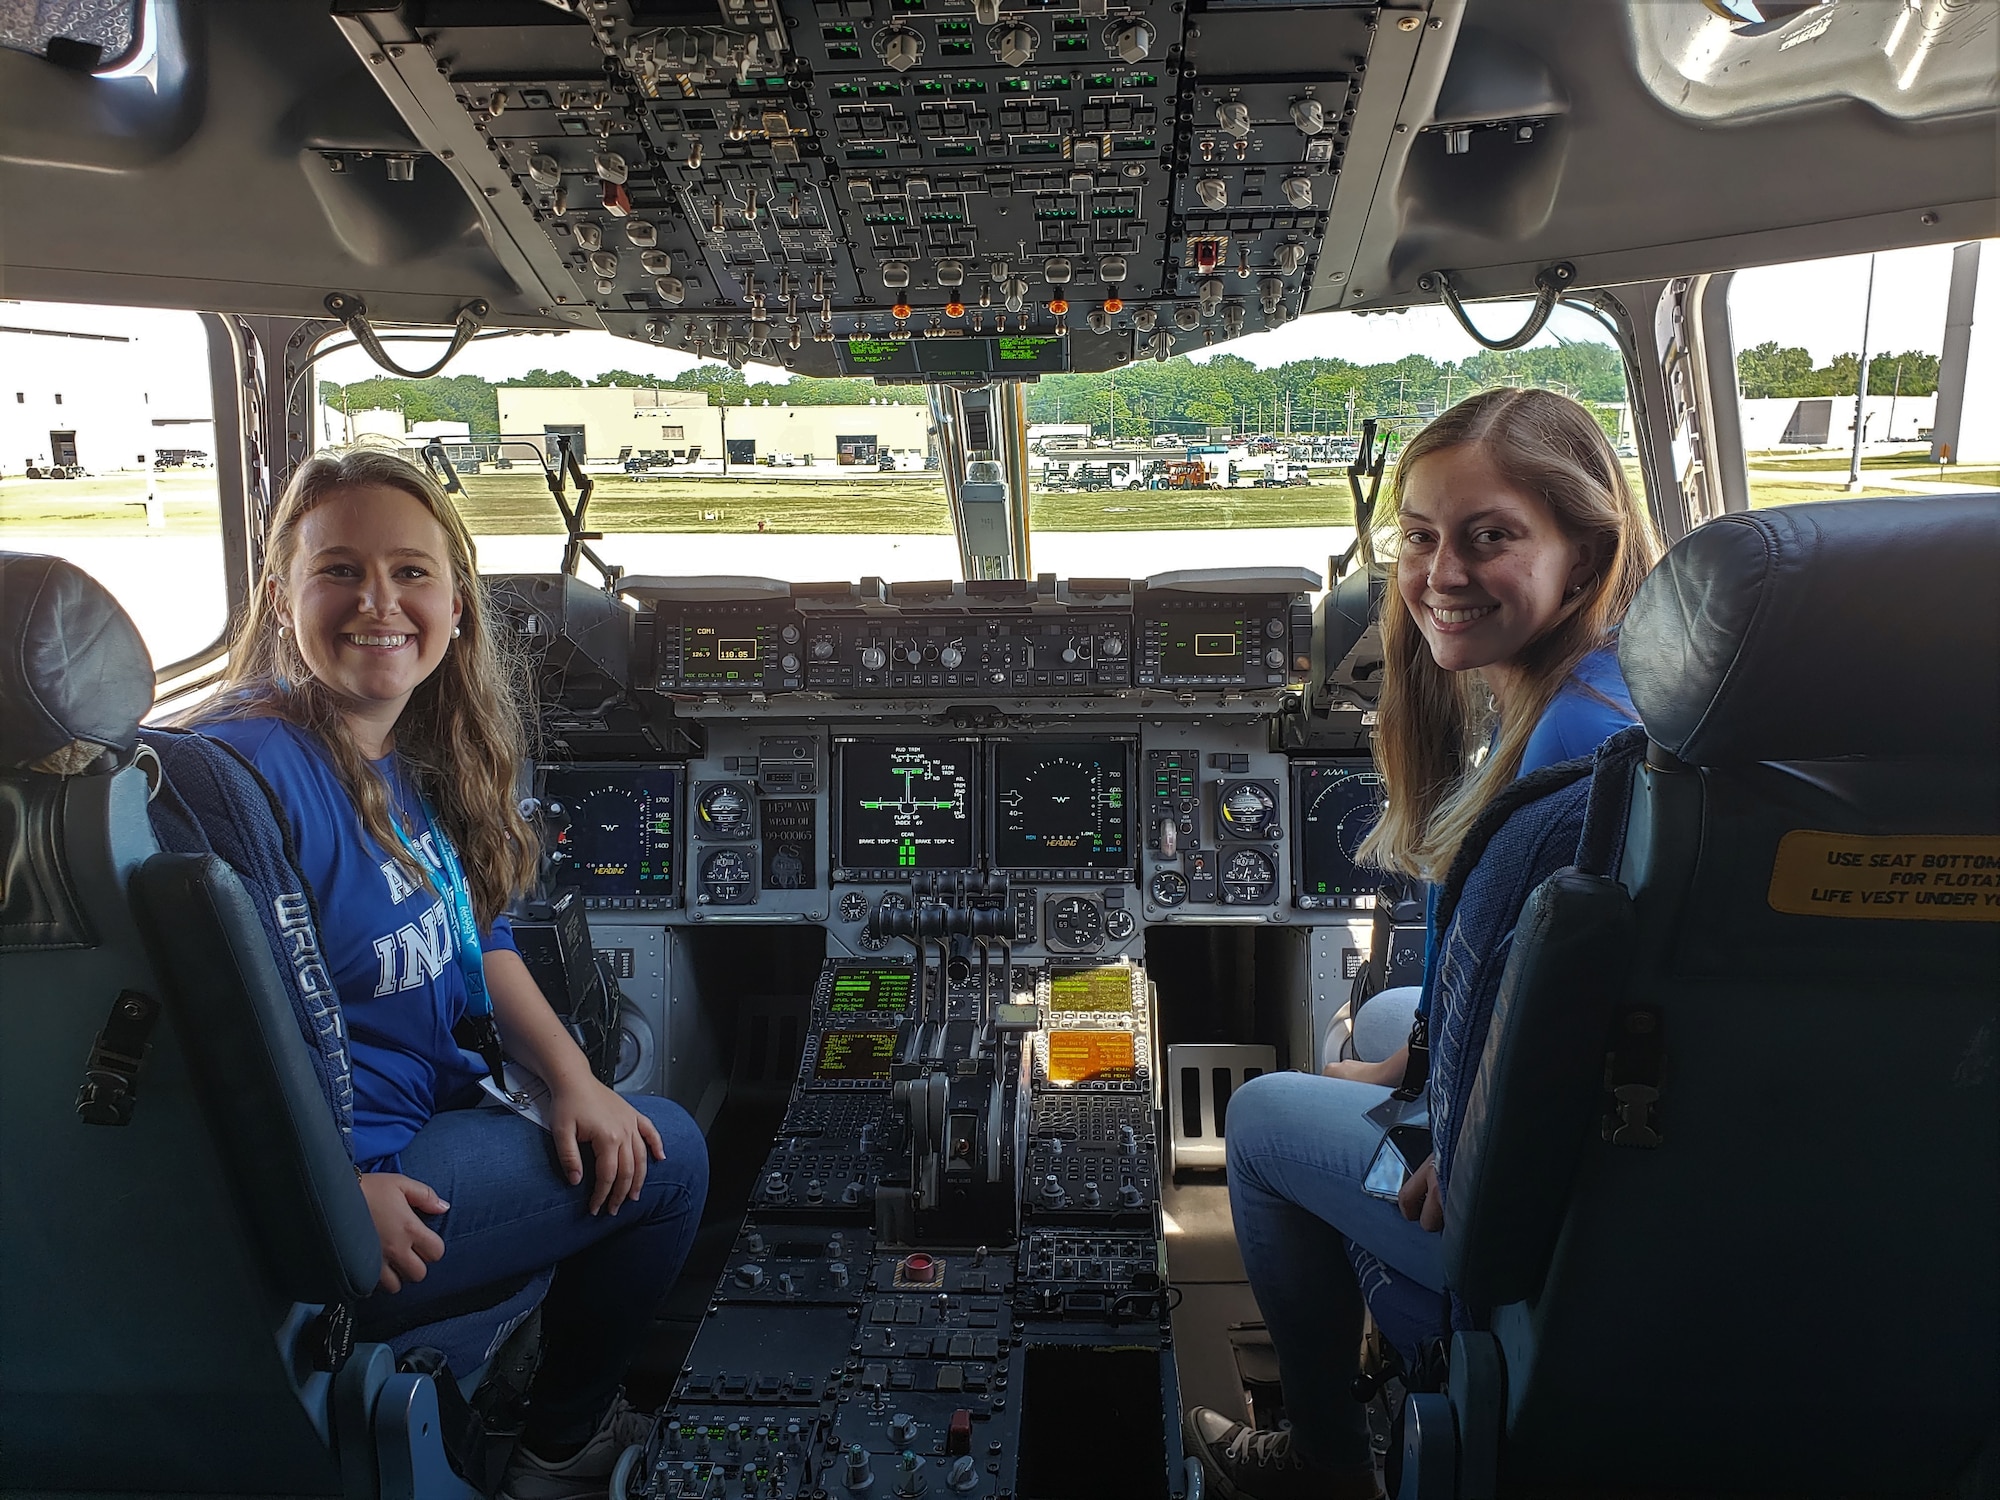 Premier College Intern Program interns Sarah Earnesty and Kayleigh Brown explore the cockpit of a C-17 during part of their three-day symposium at Wright-Patterson Air Force Base. The symposium was hosted by the Air Force Personnel Center at the Holiday Inn in Fairborn, Ohio, June 25-27.  (U.S. Air Force photo/Karina Brady)